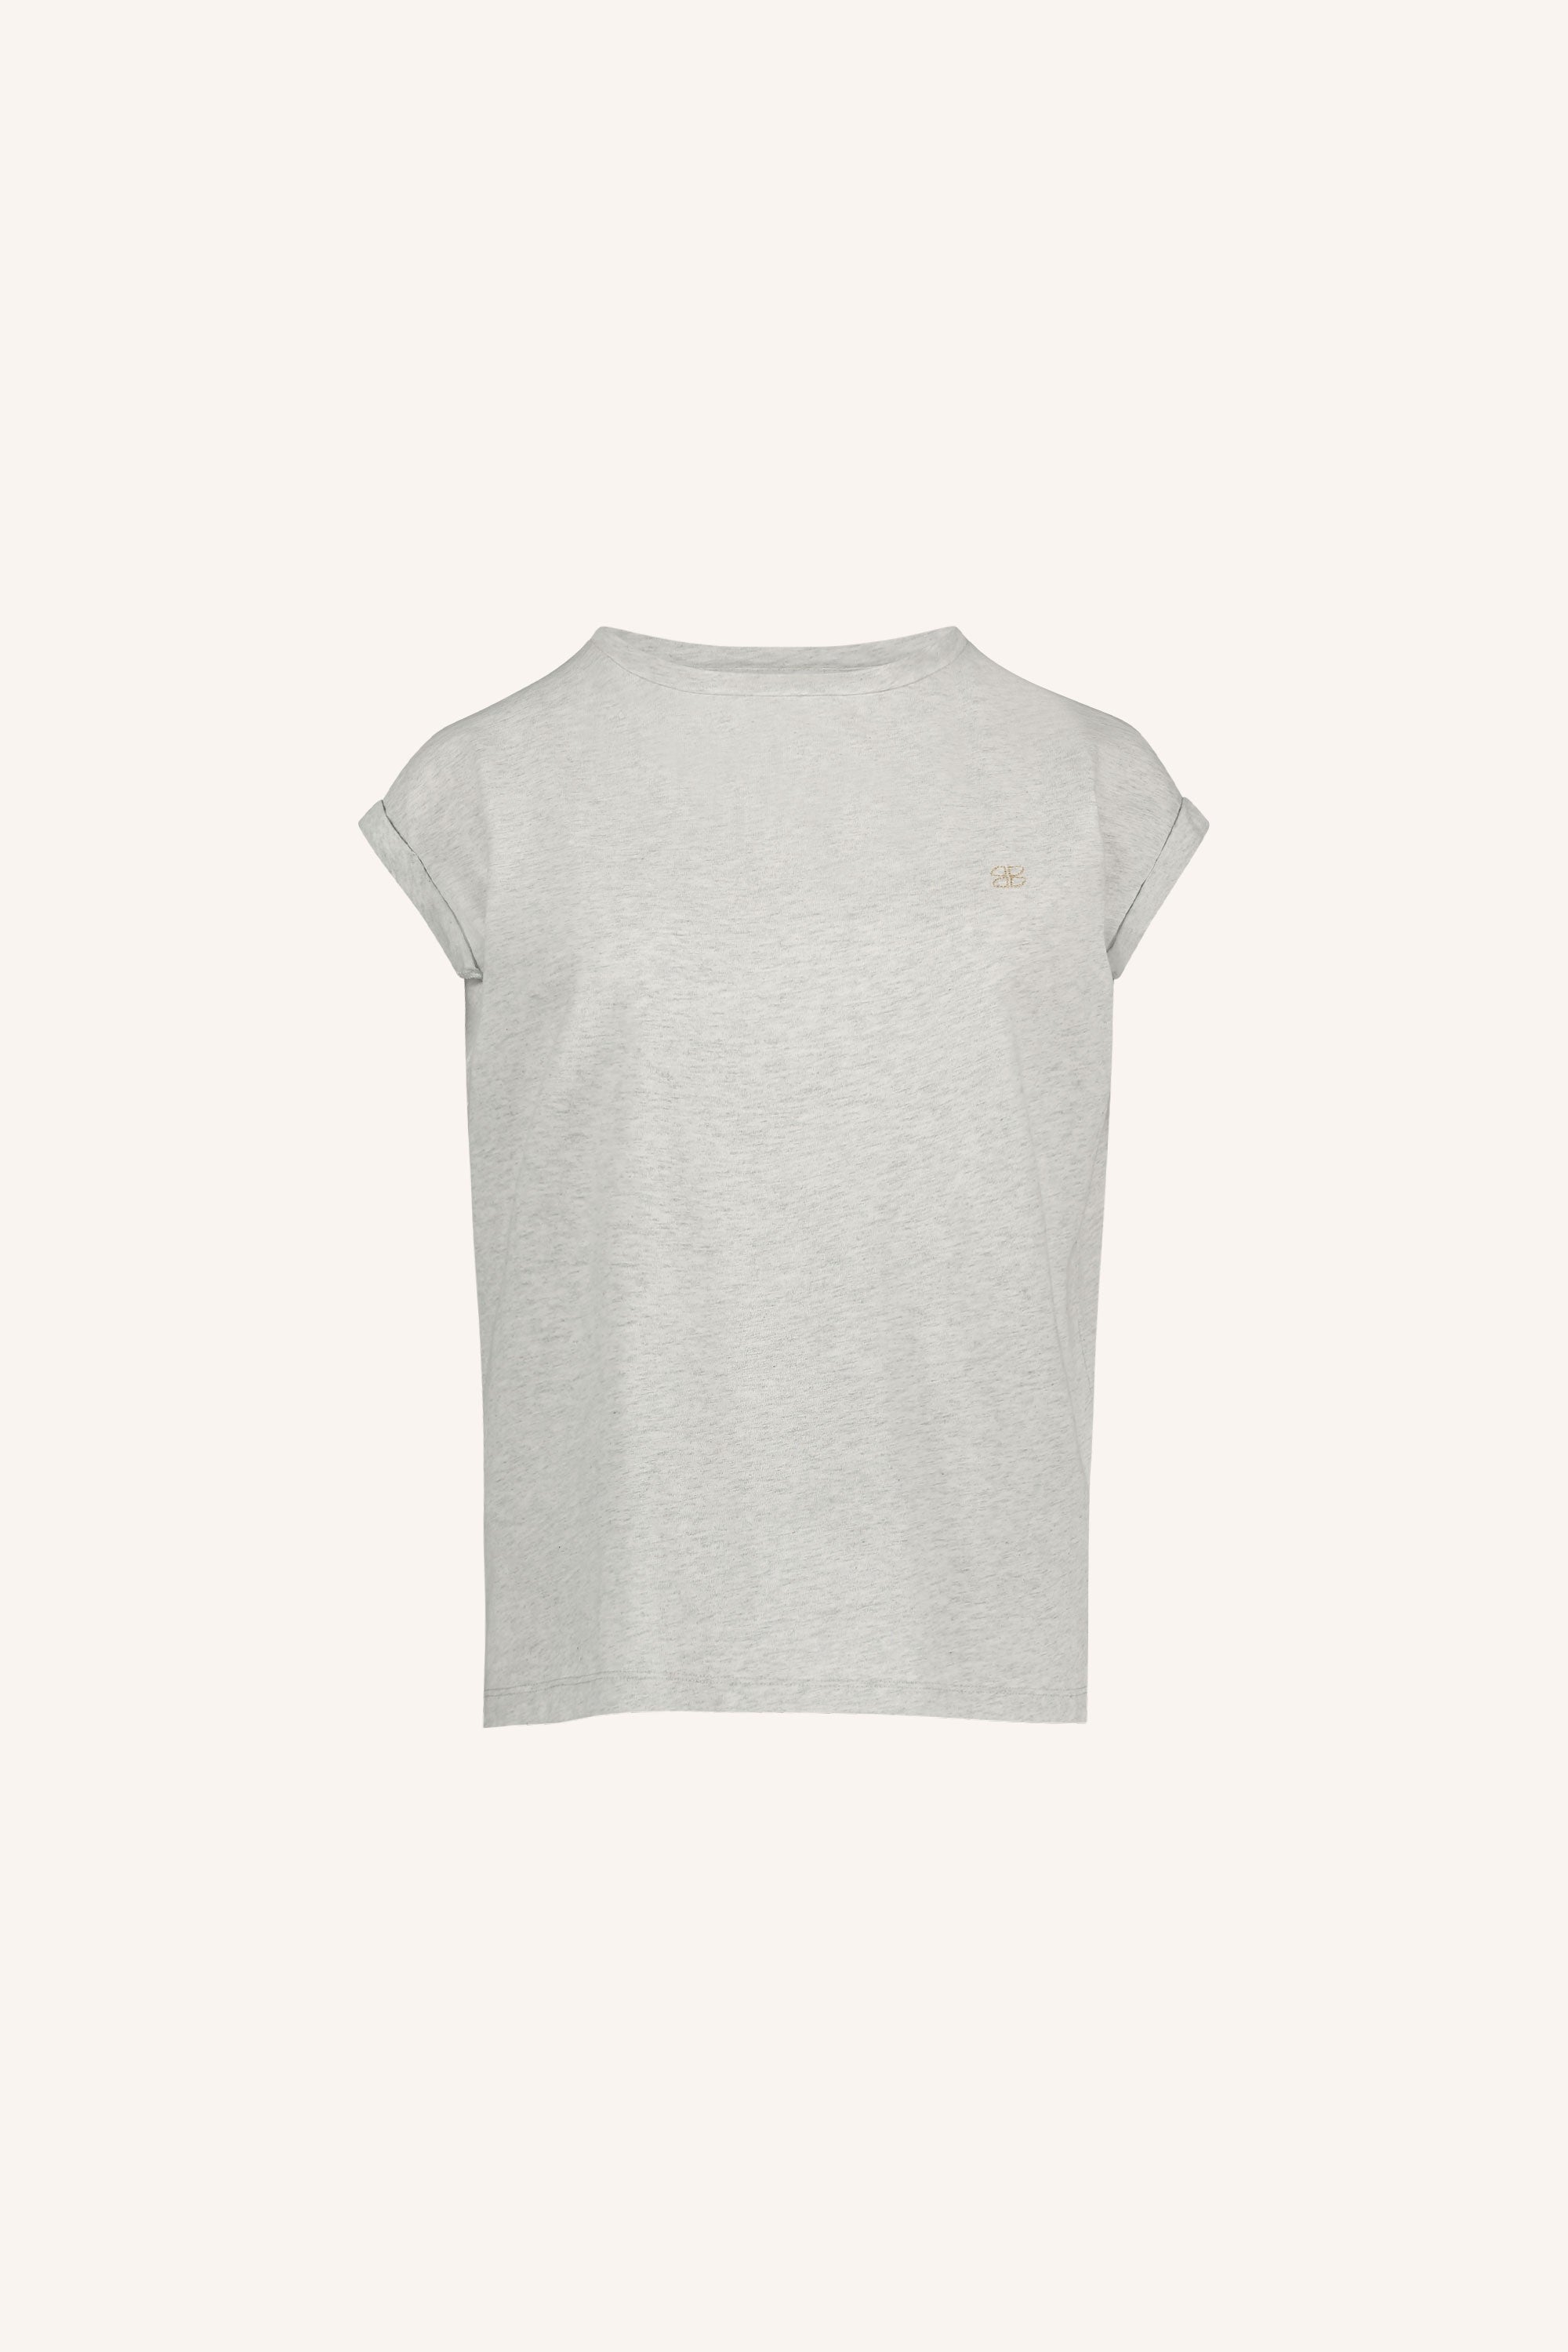 thelma boogie nights top | light grey melee